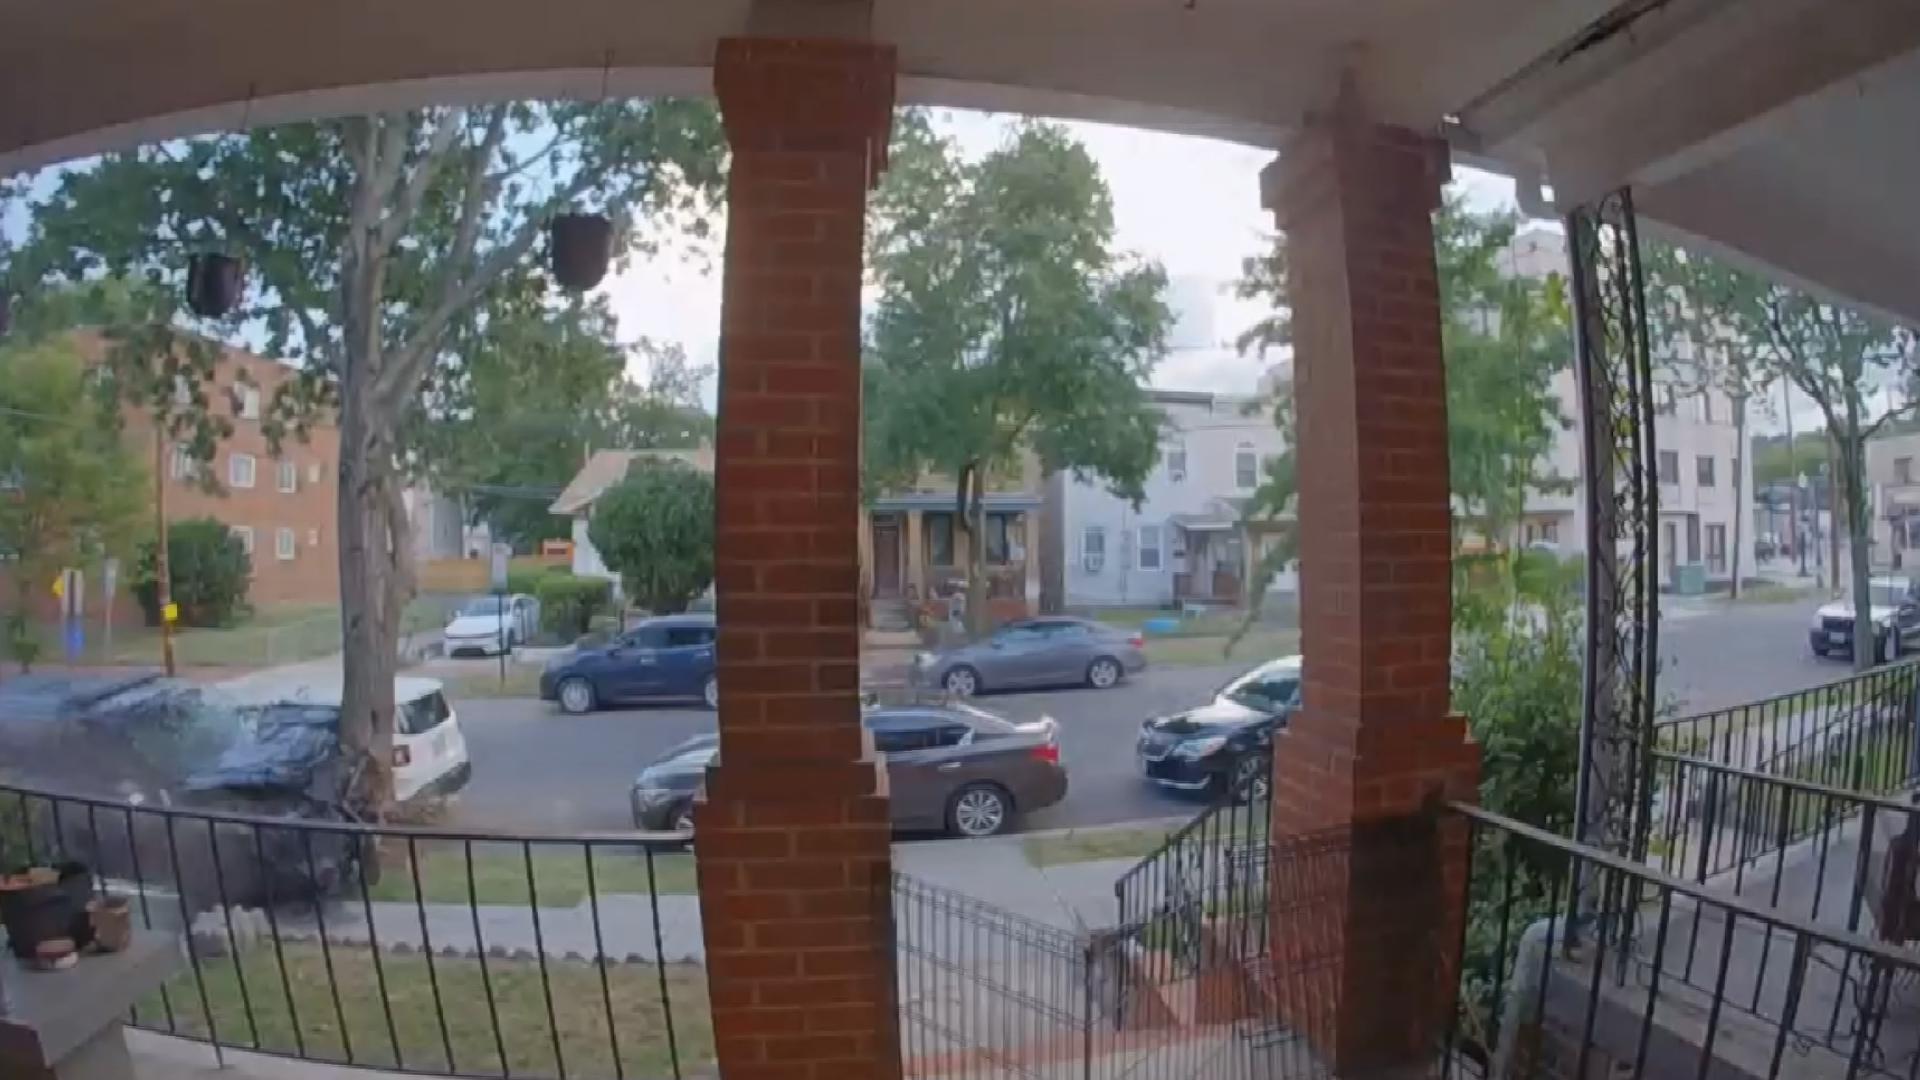 Surveillance video obtained exclusively by WUSA9 shows the moments when a white car zooms through a neighborhood and seconds later the Forest Heights cruiser crashes